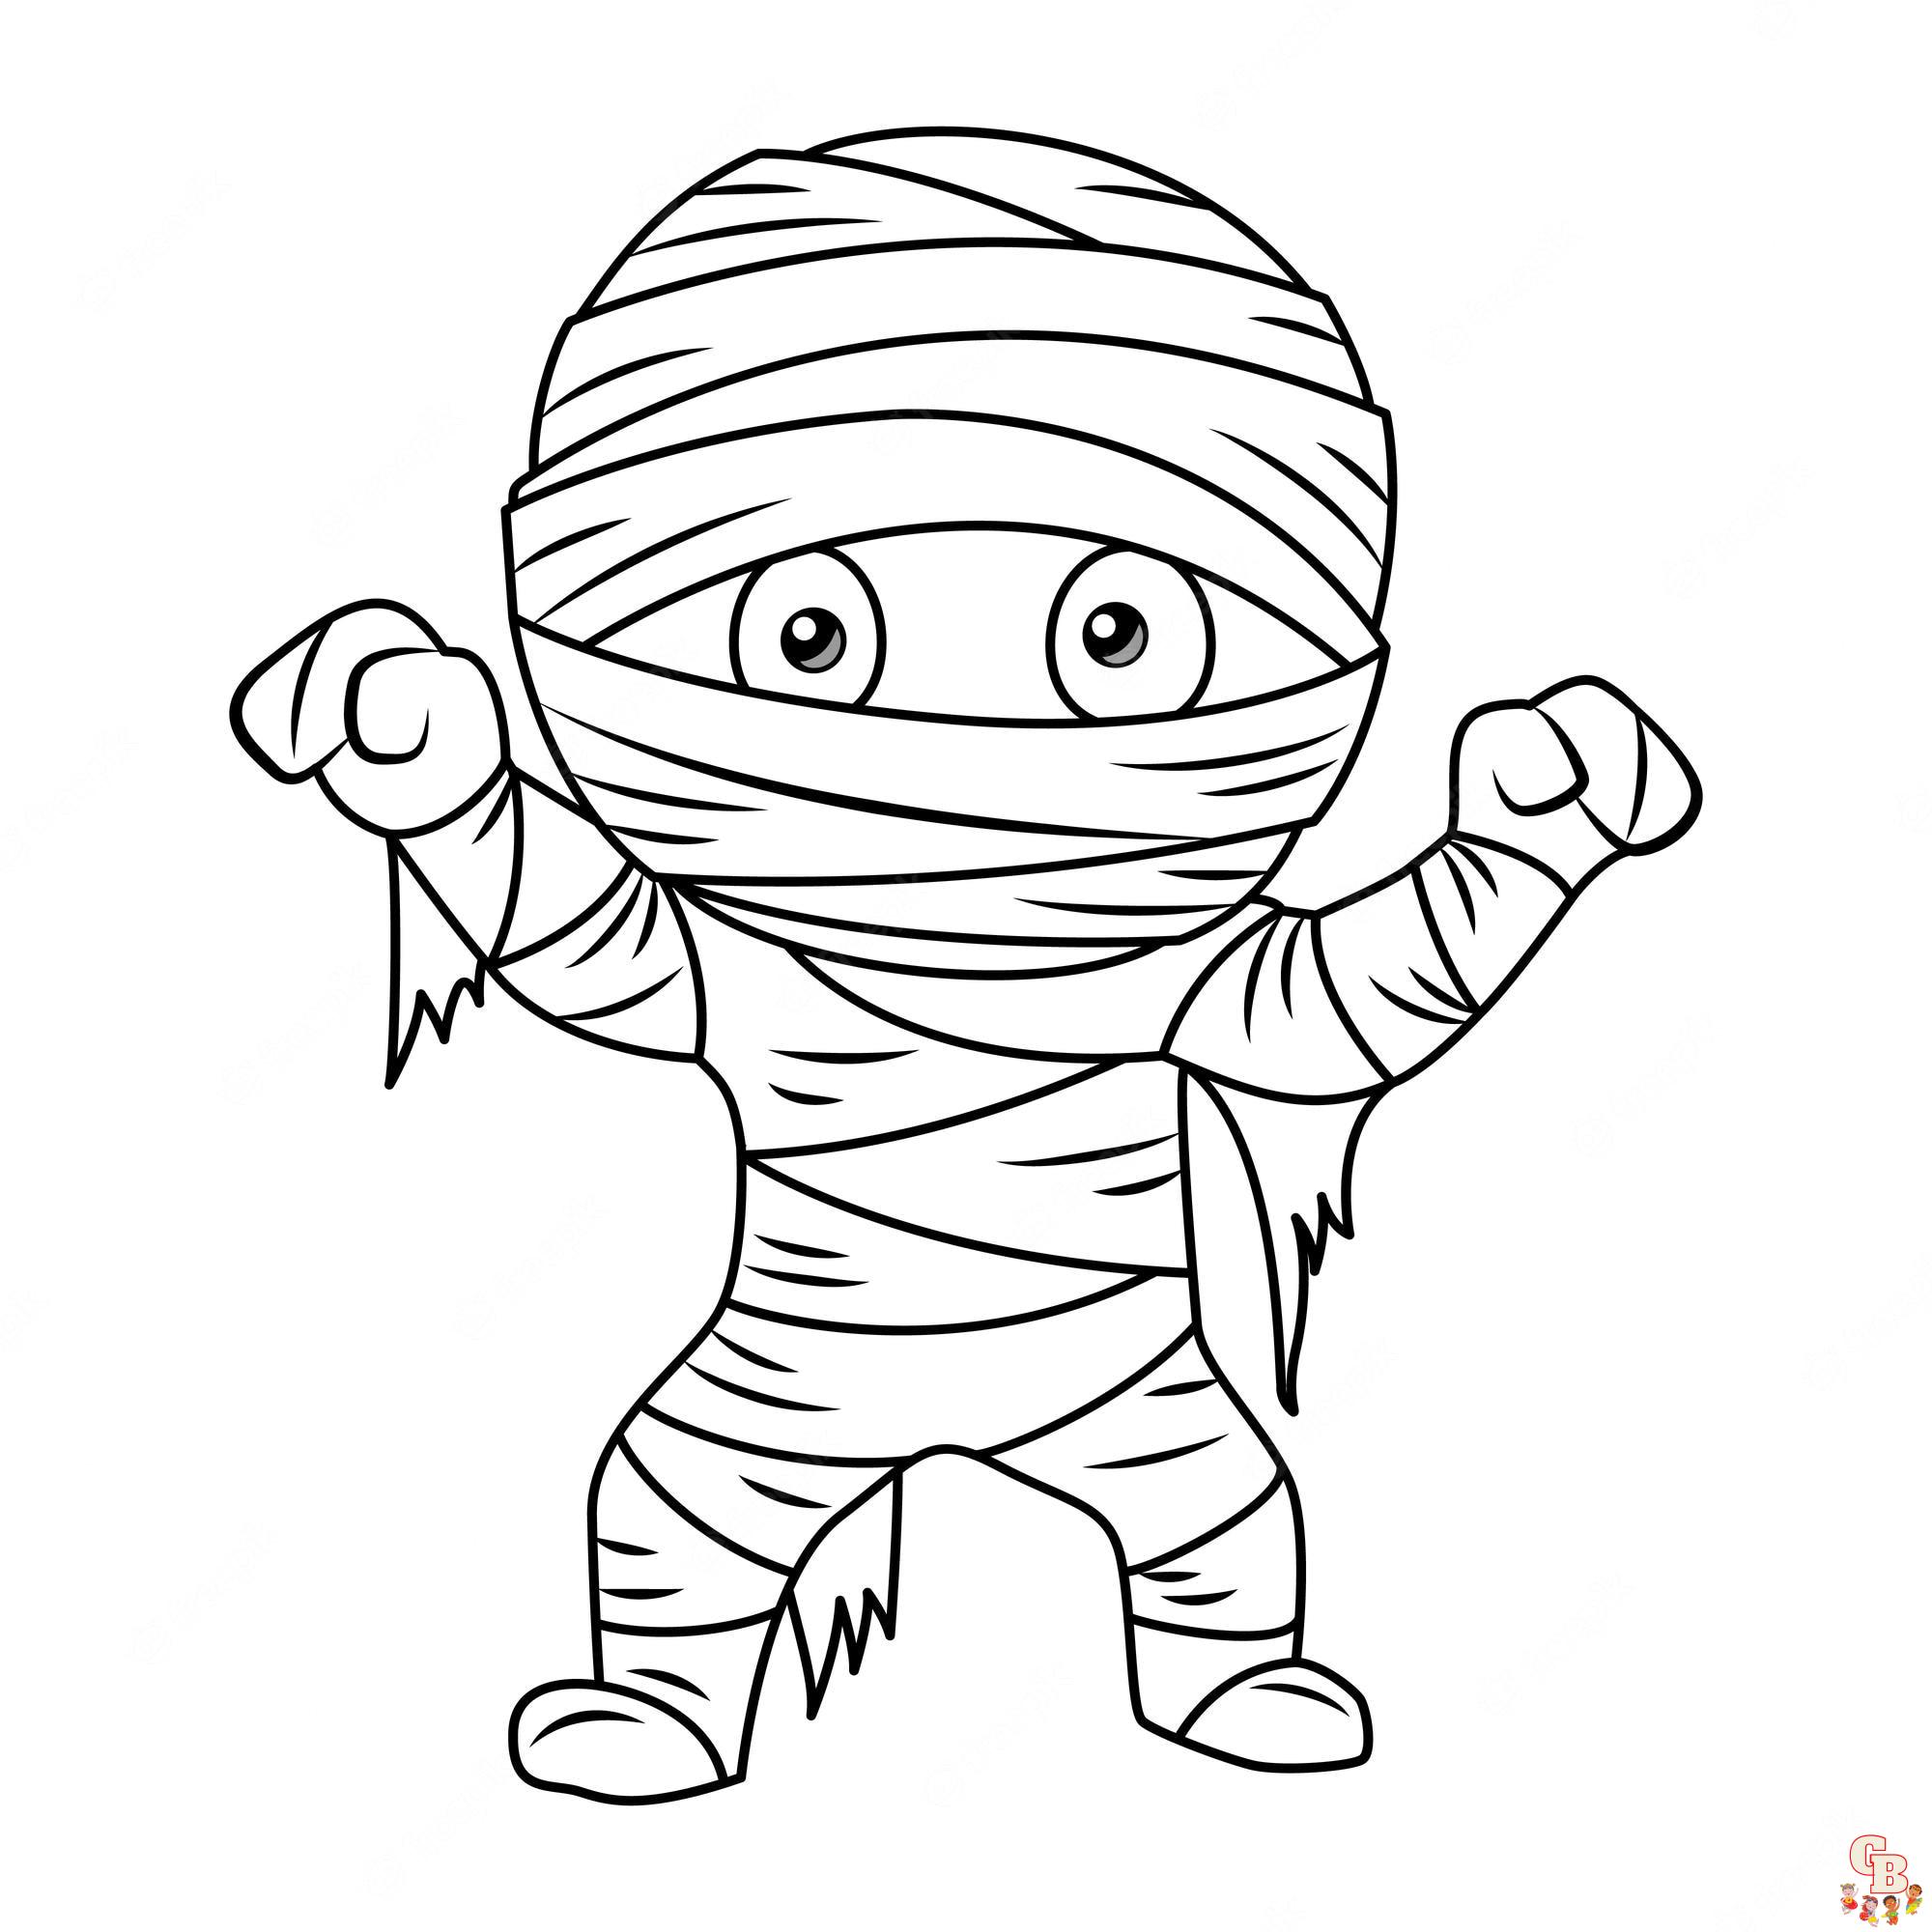 Mummy coloring pages for kids